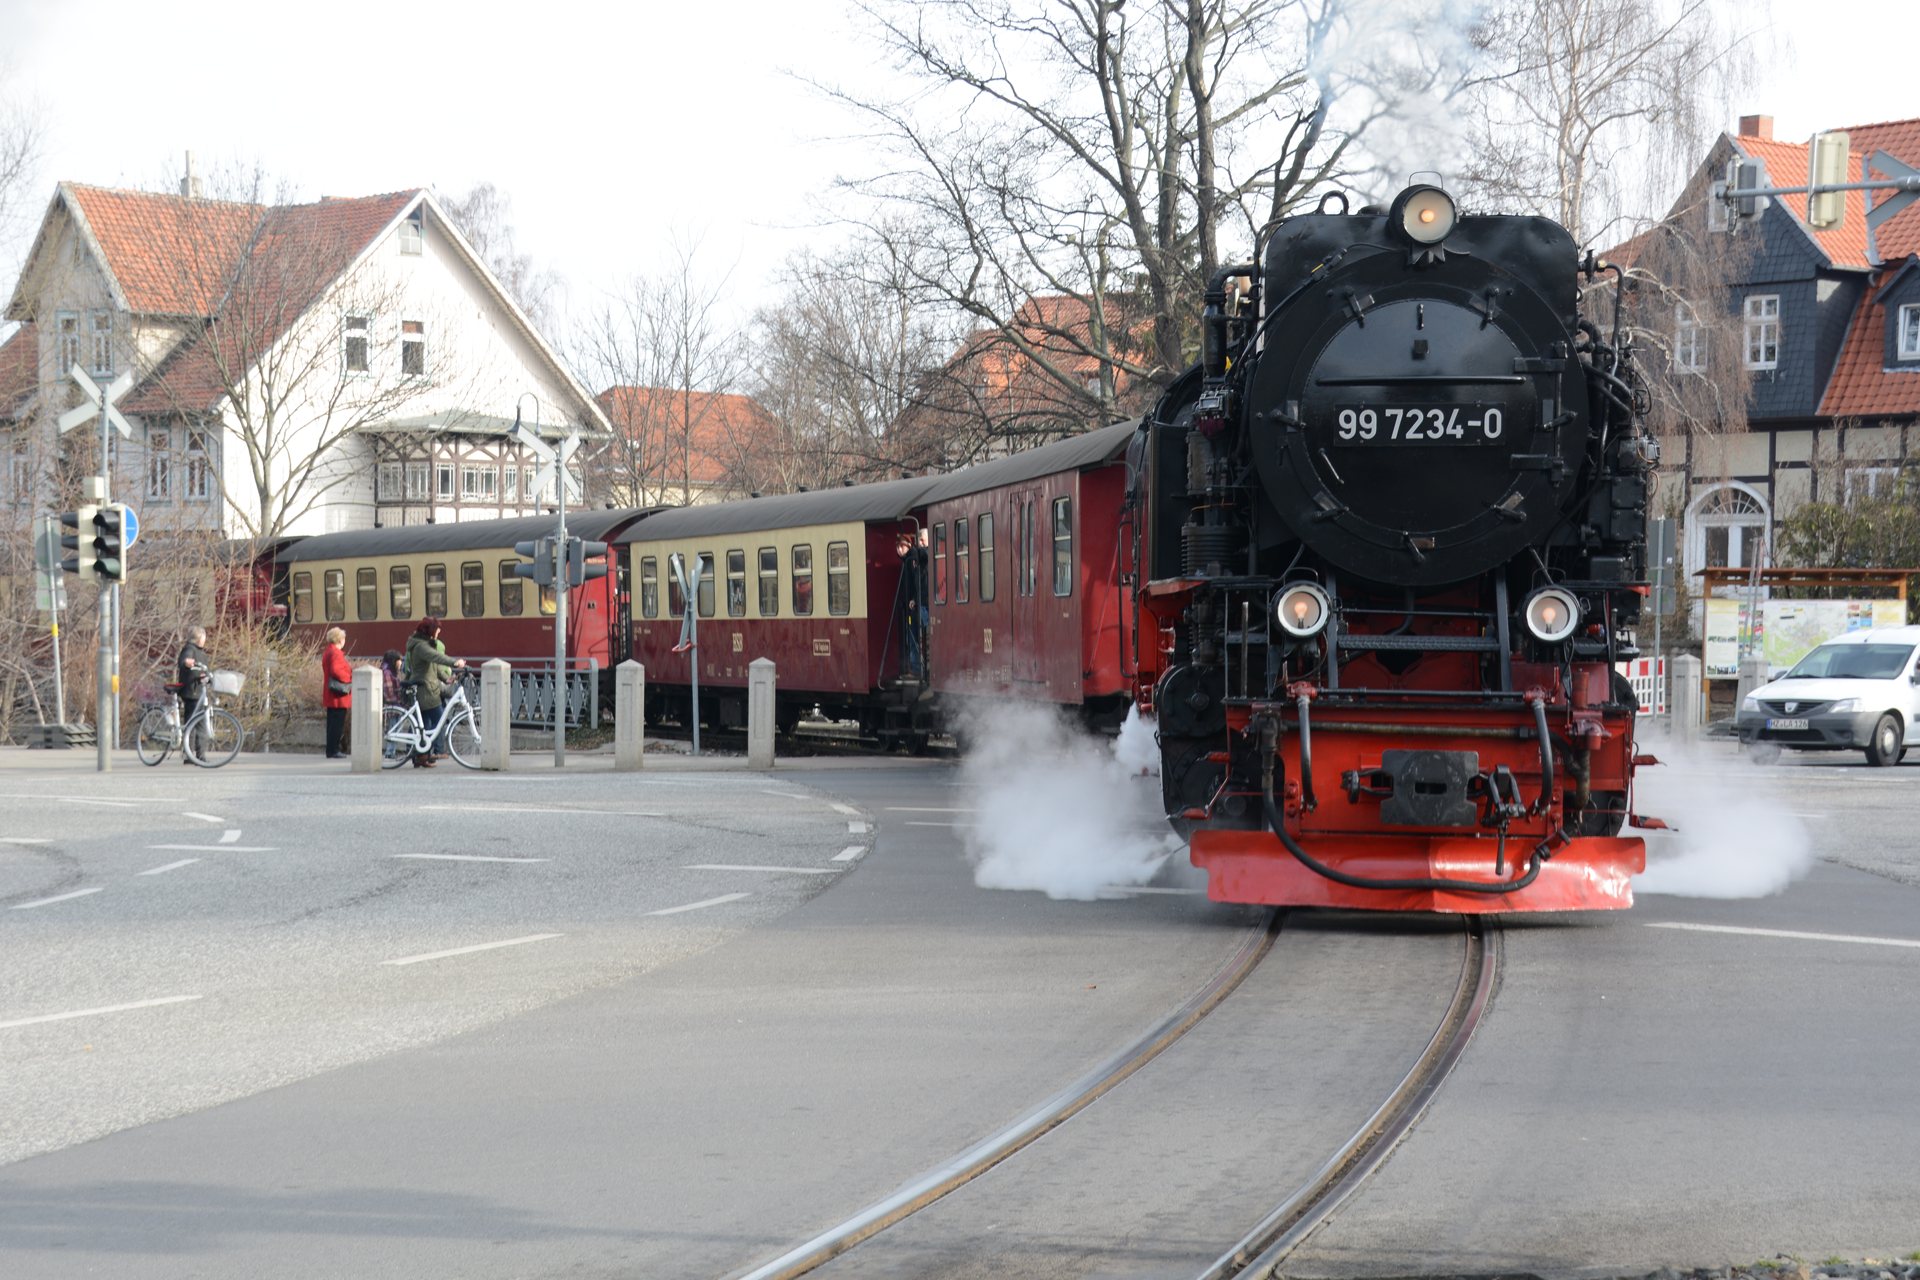 Steam and Christmas Markets in Germany